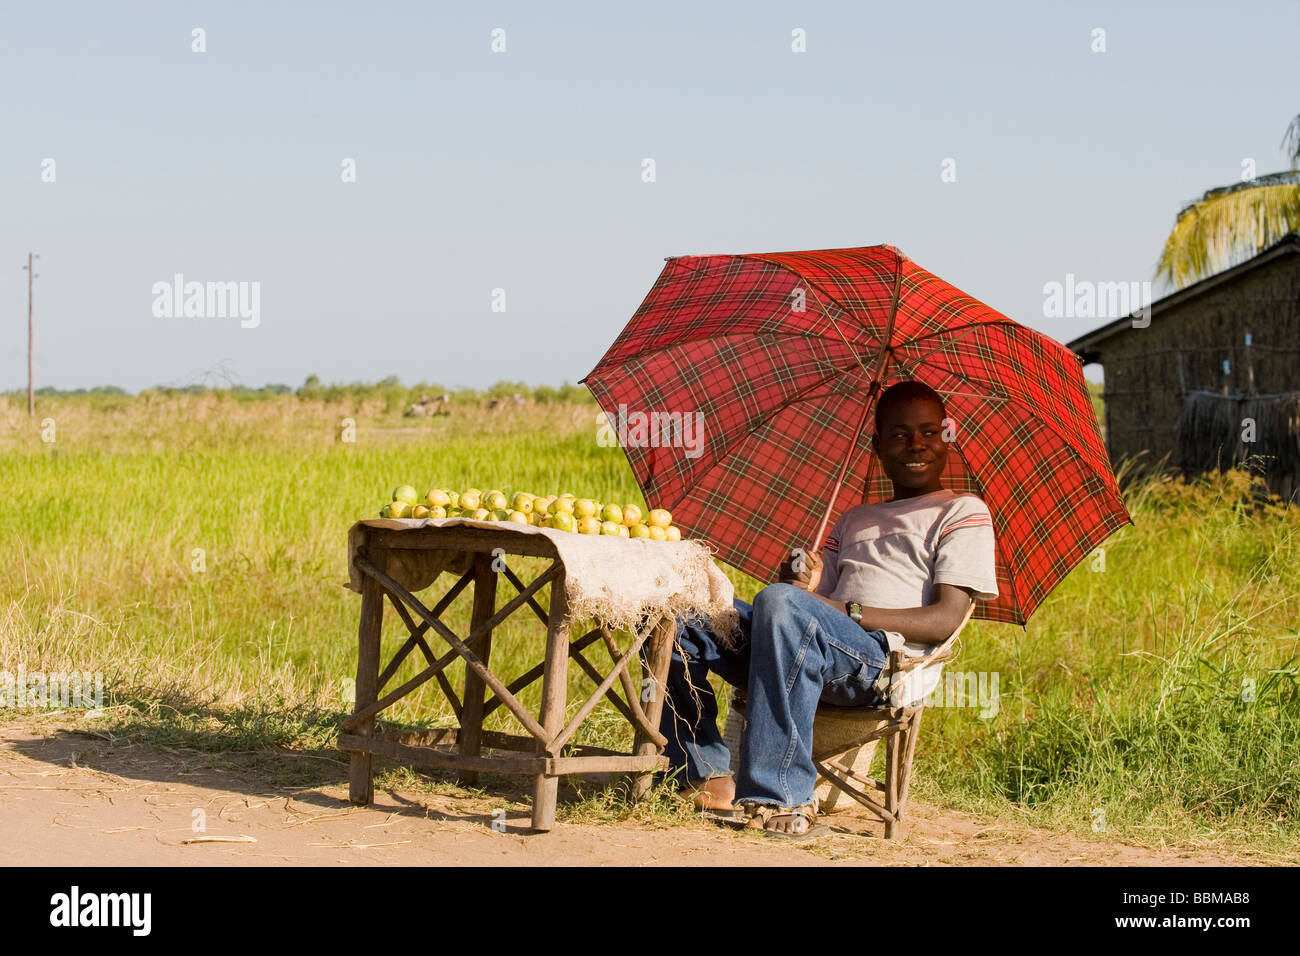 A street hawker sitting under an umbrella selling fruits Quelimane Mozambique Stock Photo